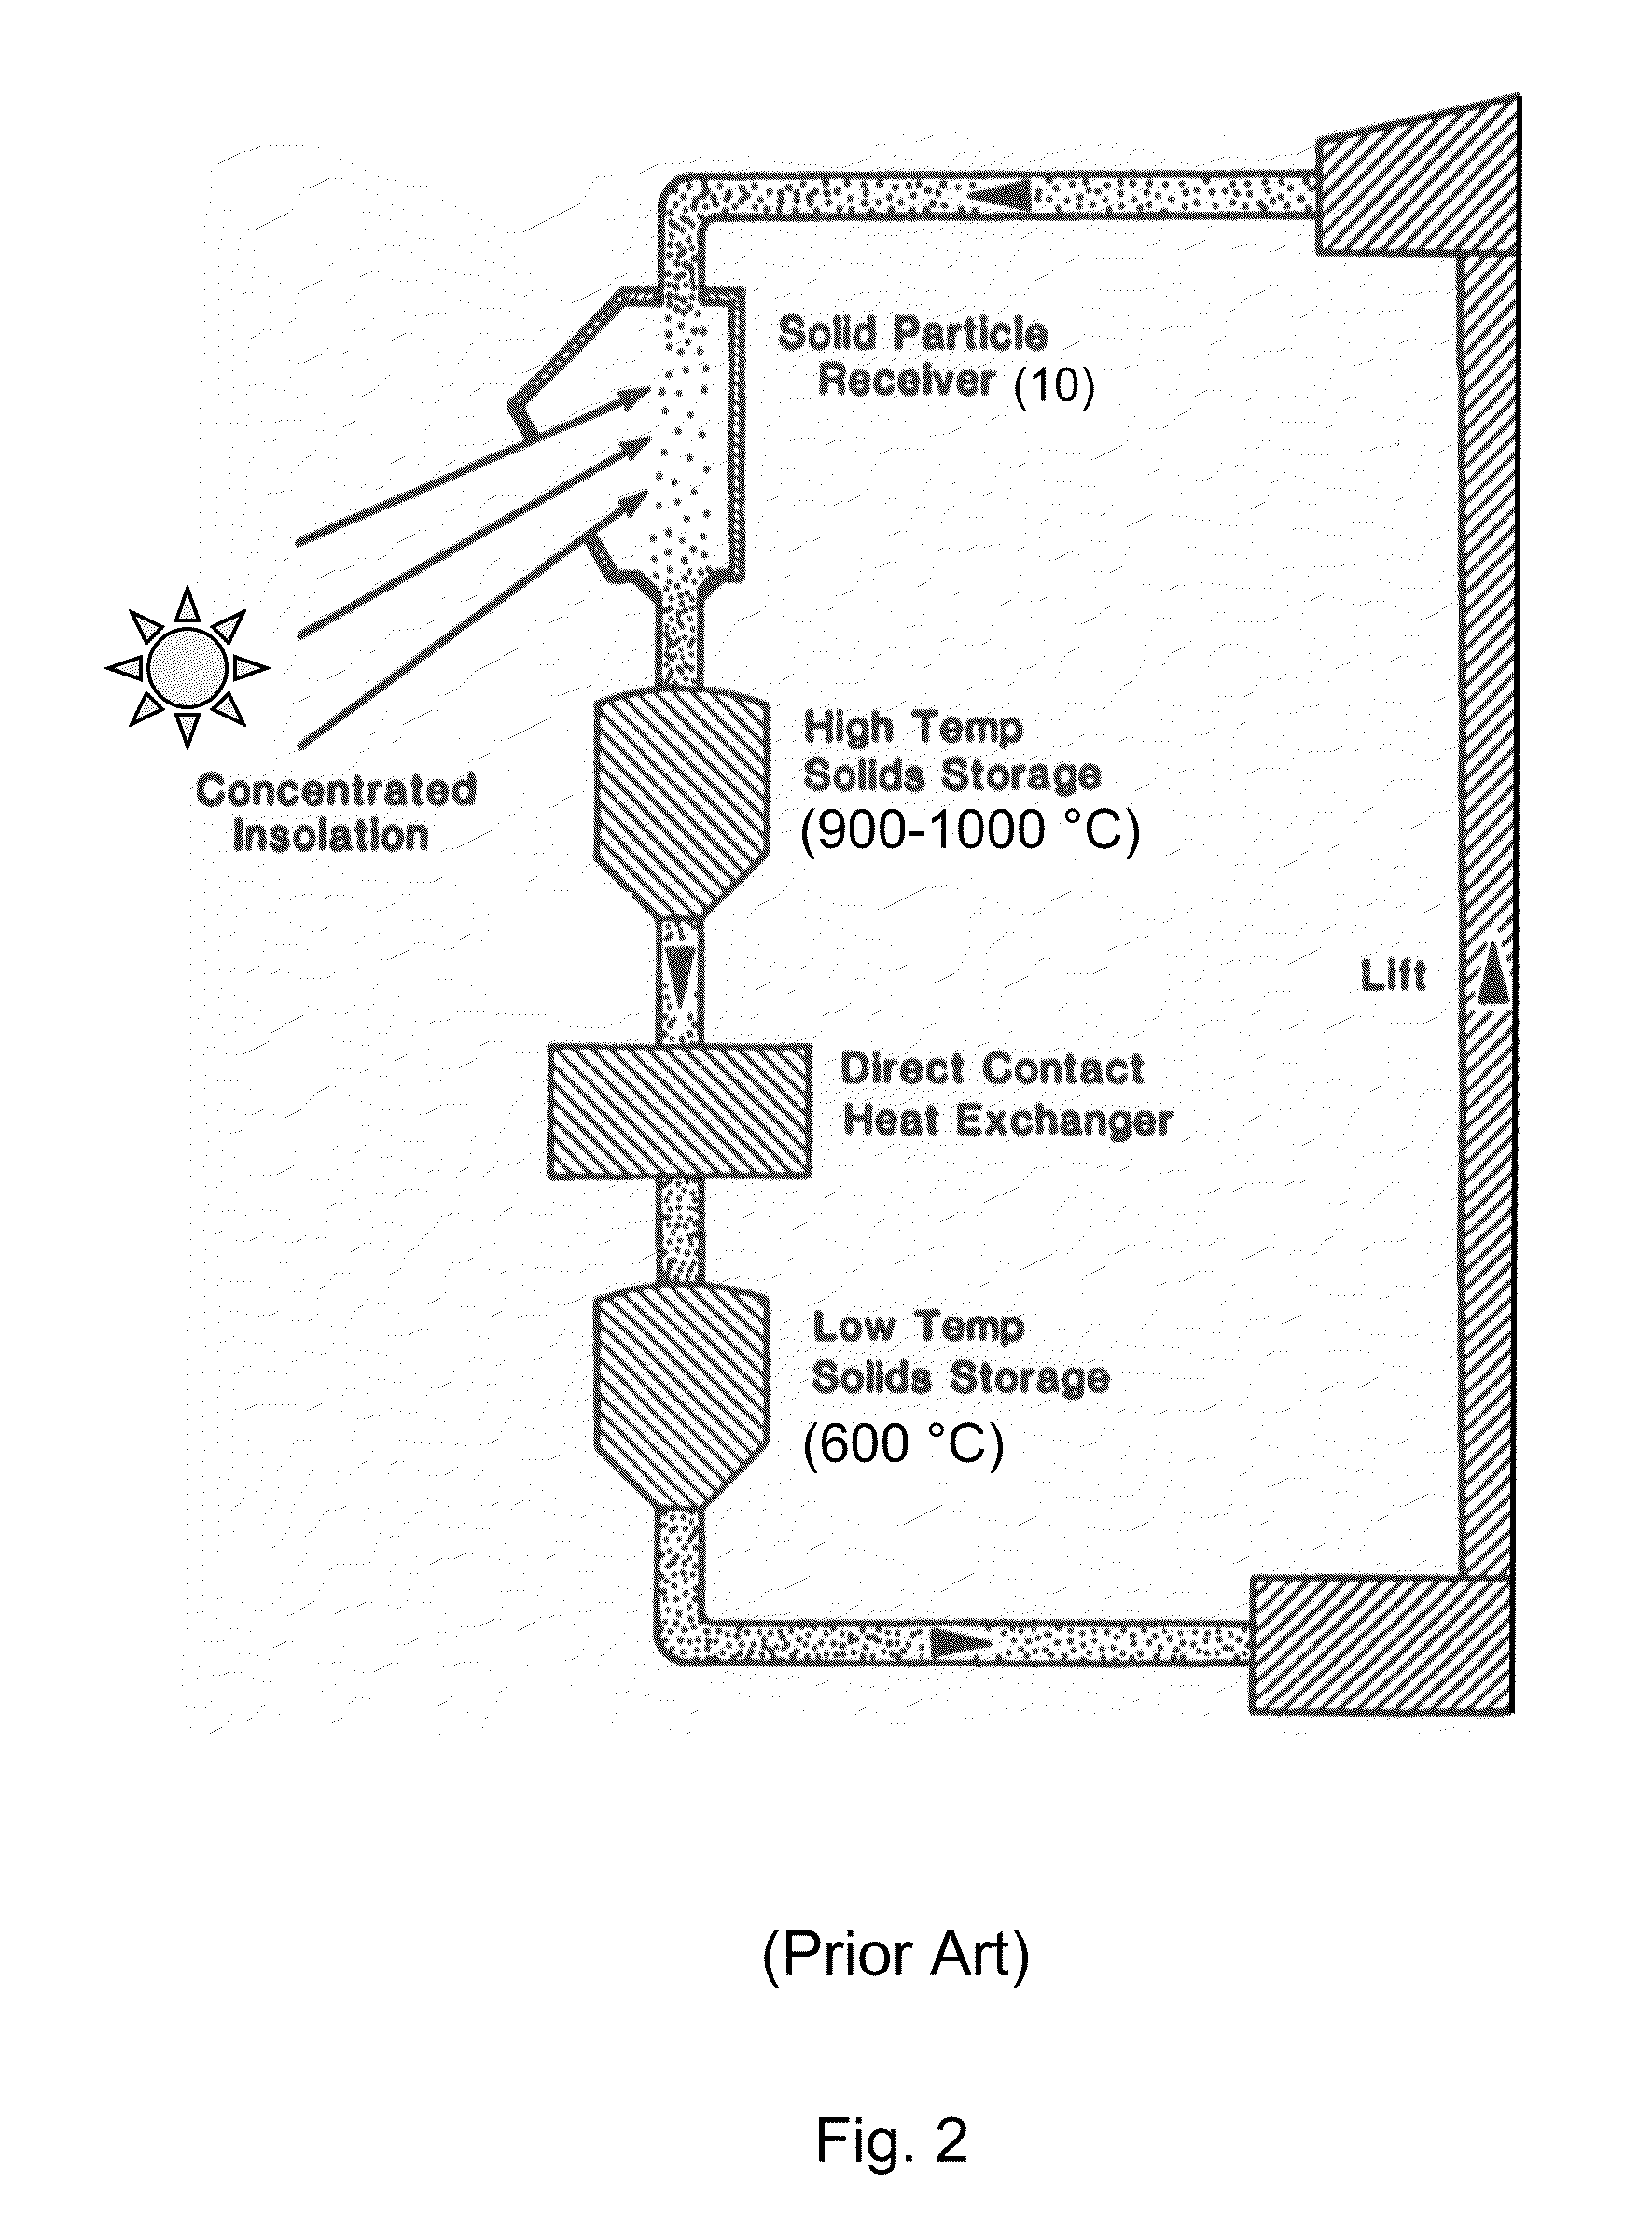 Suction-recirculation device for stabilizing particle flows within a solar powered solid particle receiver